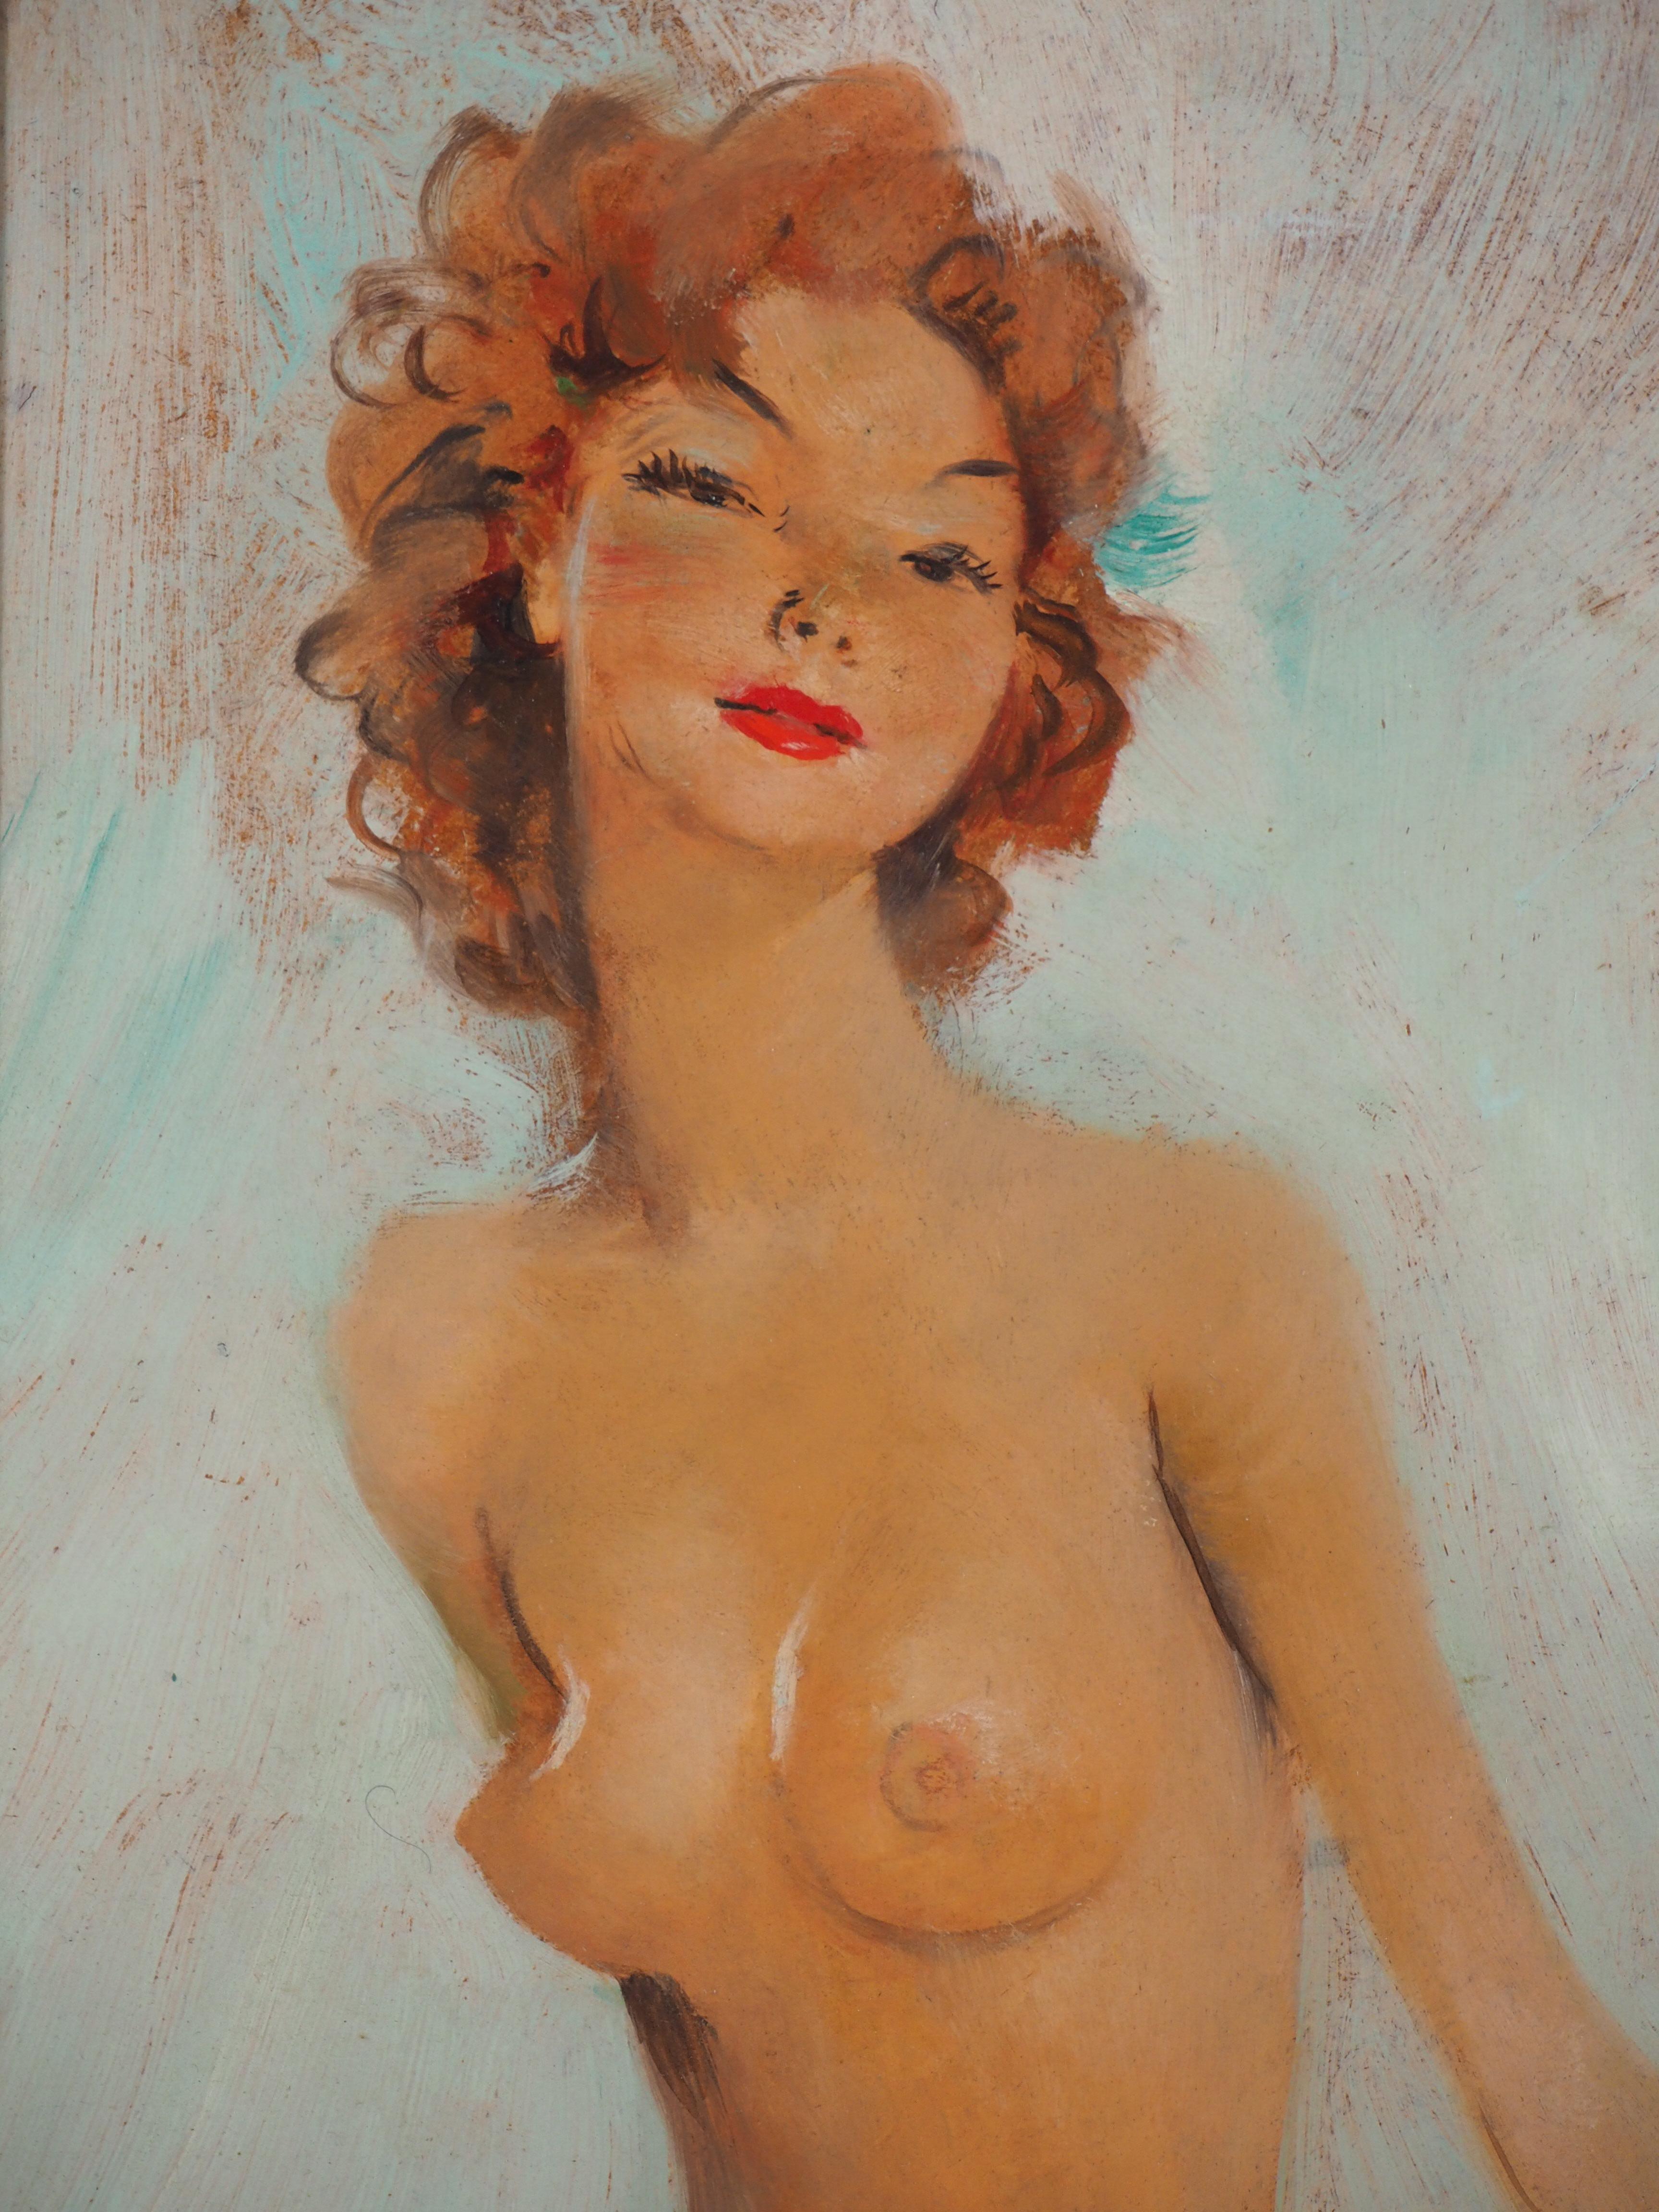 Jean-Gabriel DOMERGUE
Smilling model, c. 1950

Original oil painting
Handsigned bottom right
On panel 33 x 24 cm (c. 13 x 10 in)
With frame 48 x 39 cm (c. 19 x 15 in)

Excellent condition, very light uses to the frame